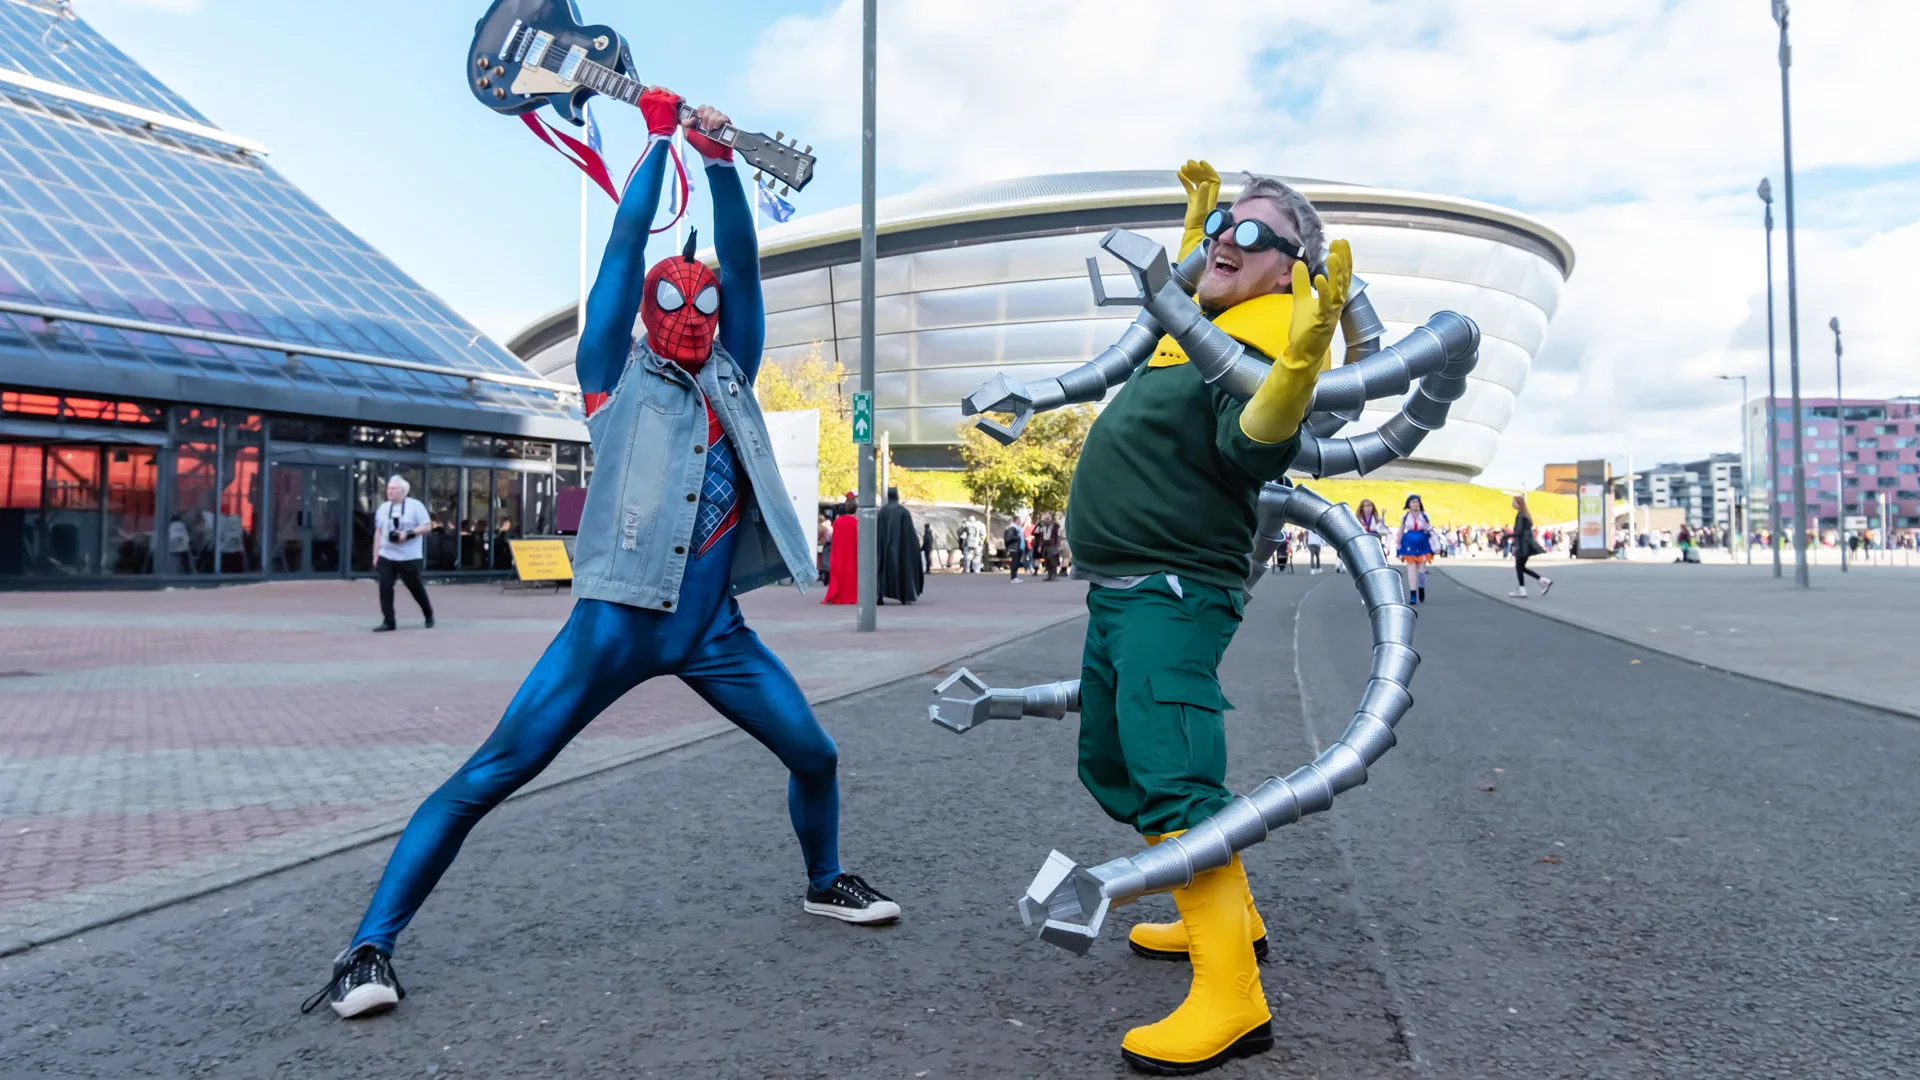 A photograph of two people at the Glasgow Comic Con outside in the carpark, dressed as Spiderman and Doctor Octopus pretending to have a fight as Spiderman holds a guitar up in the air and Doc Oc pretends to looks scared